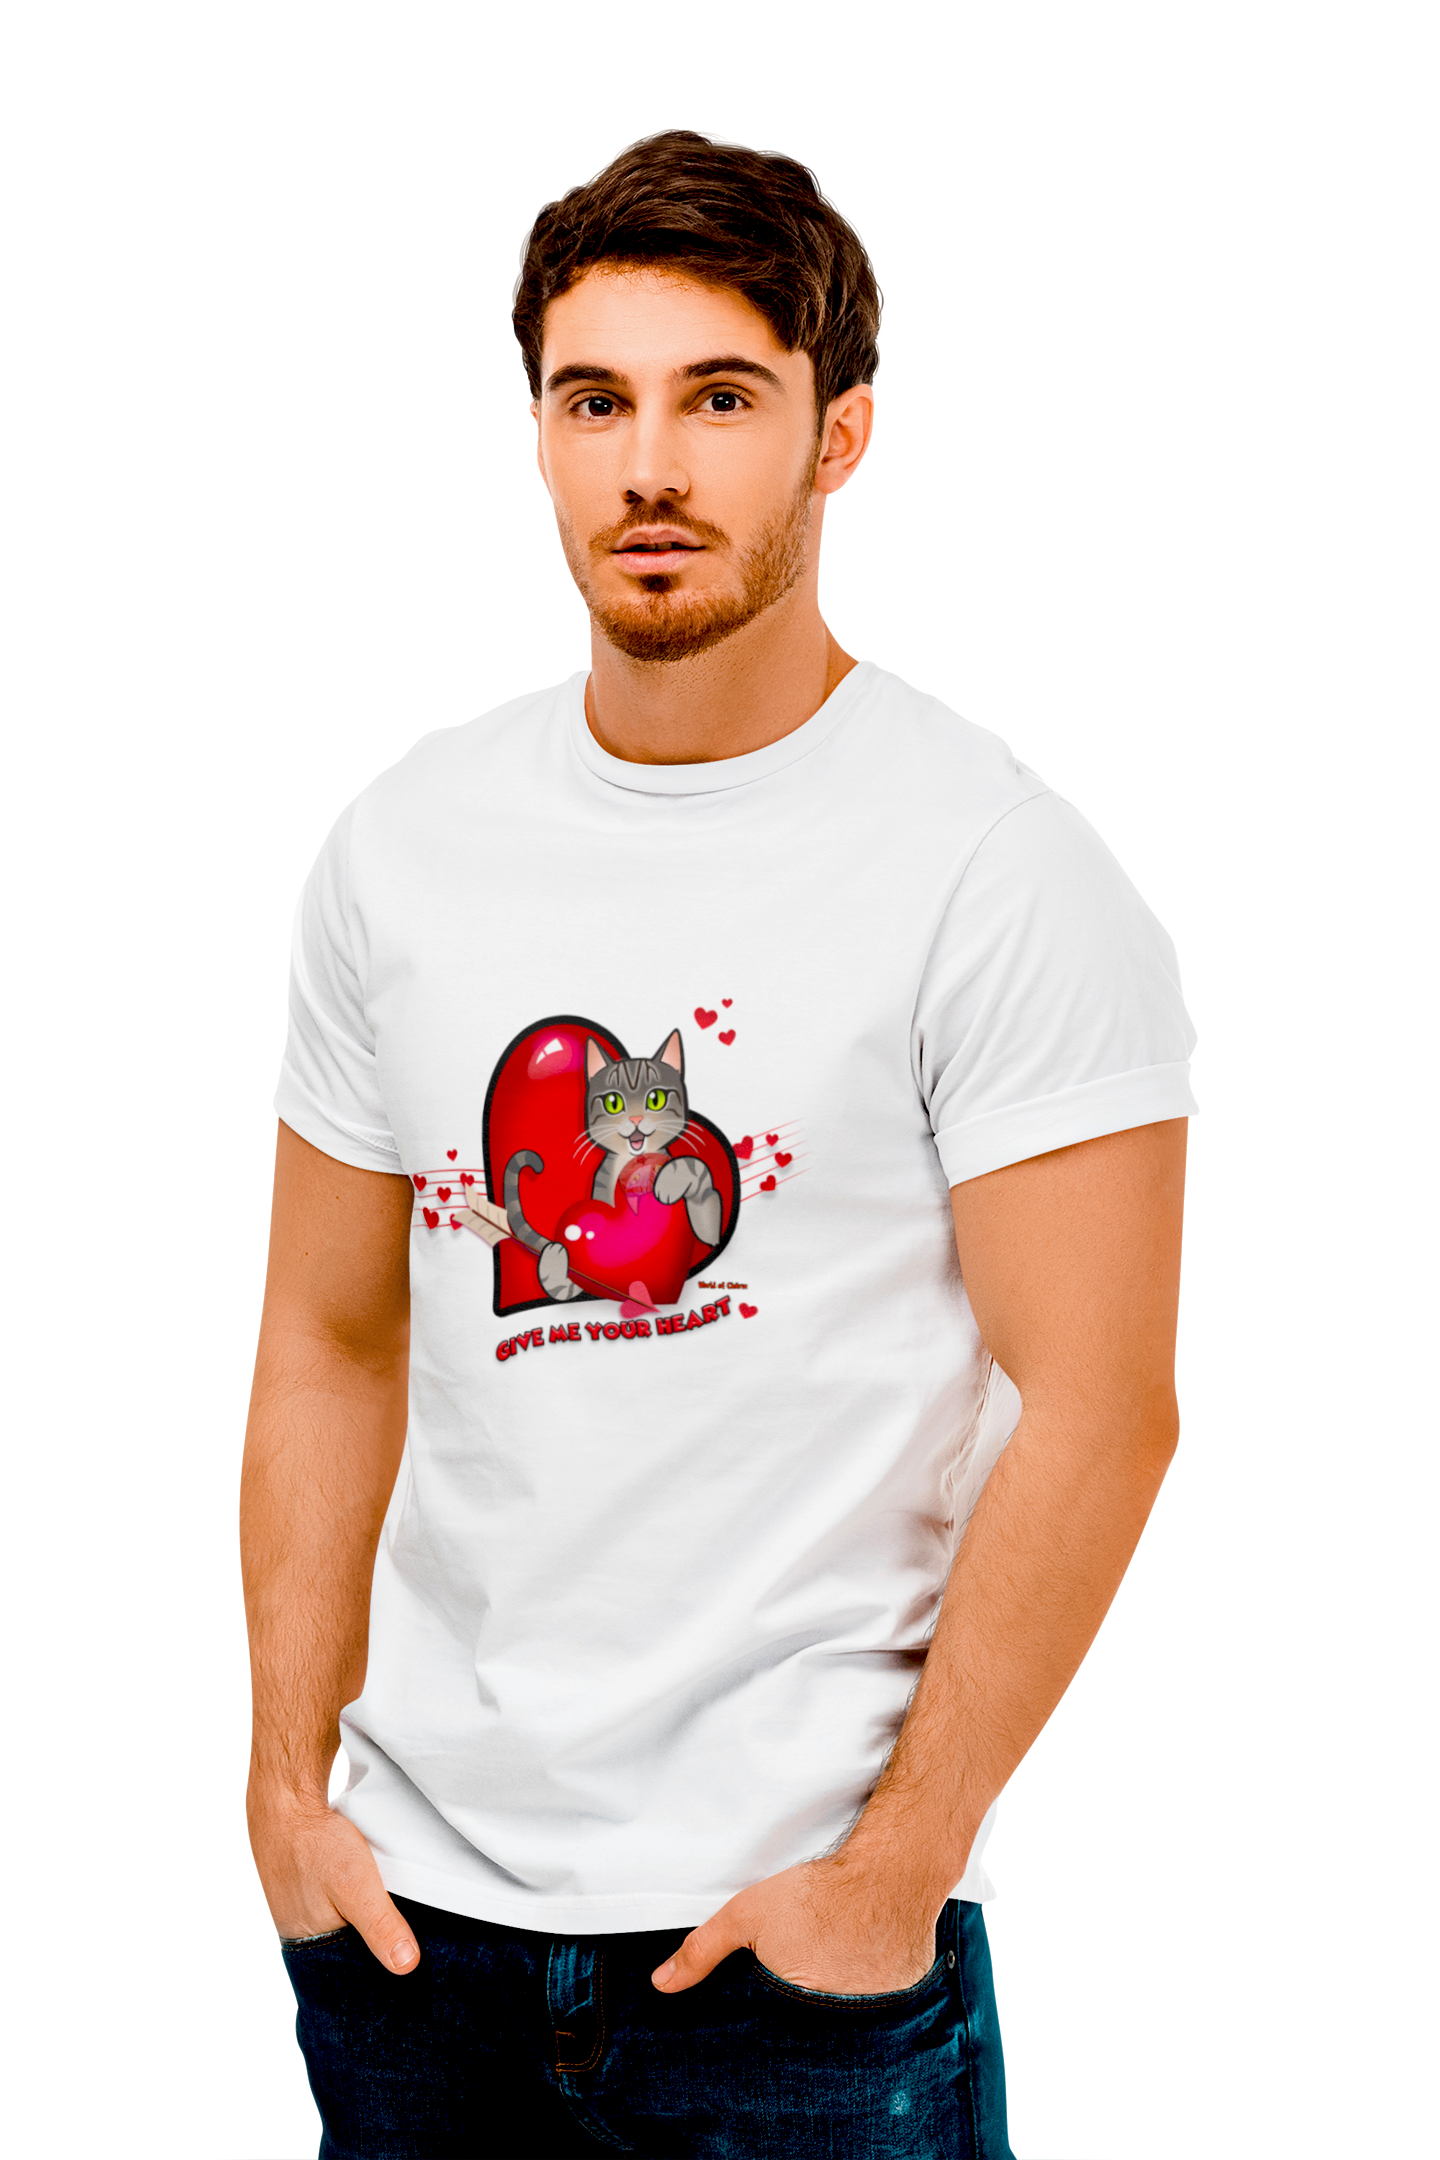 T-Shirt Short-Sleeve Unisex - "Give Me Your Heart"